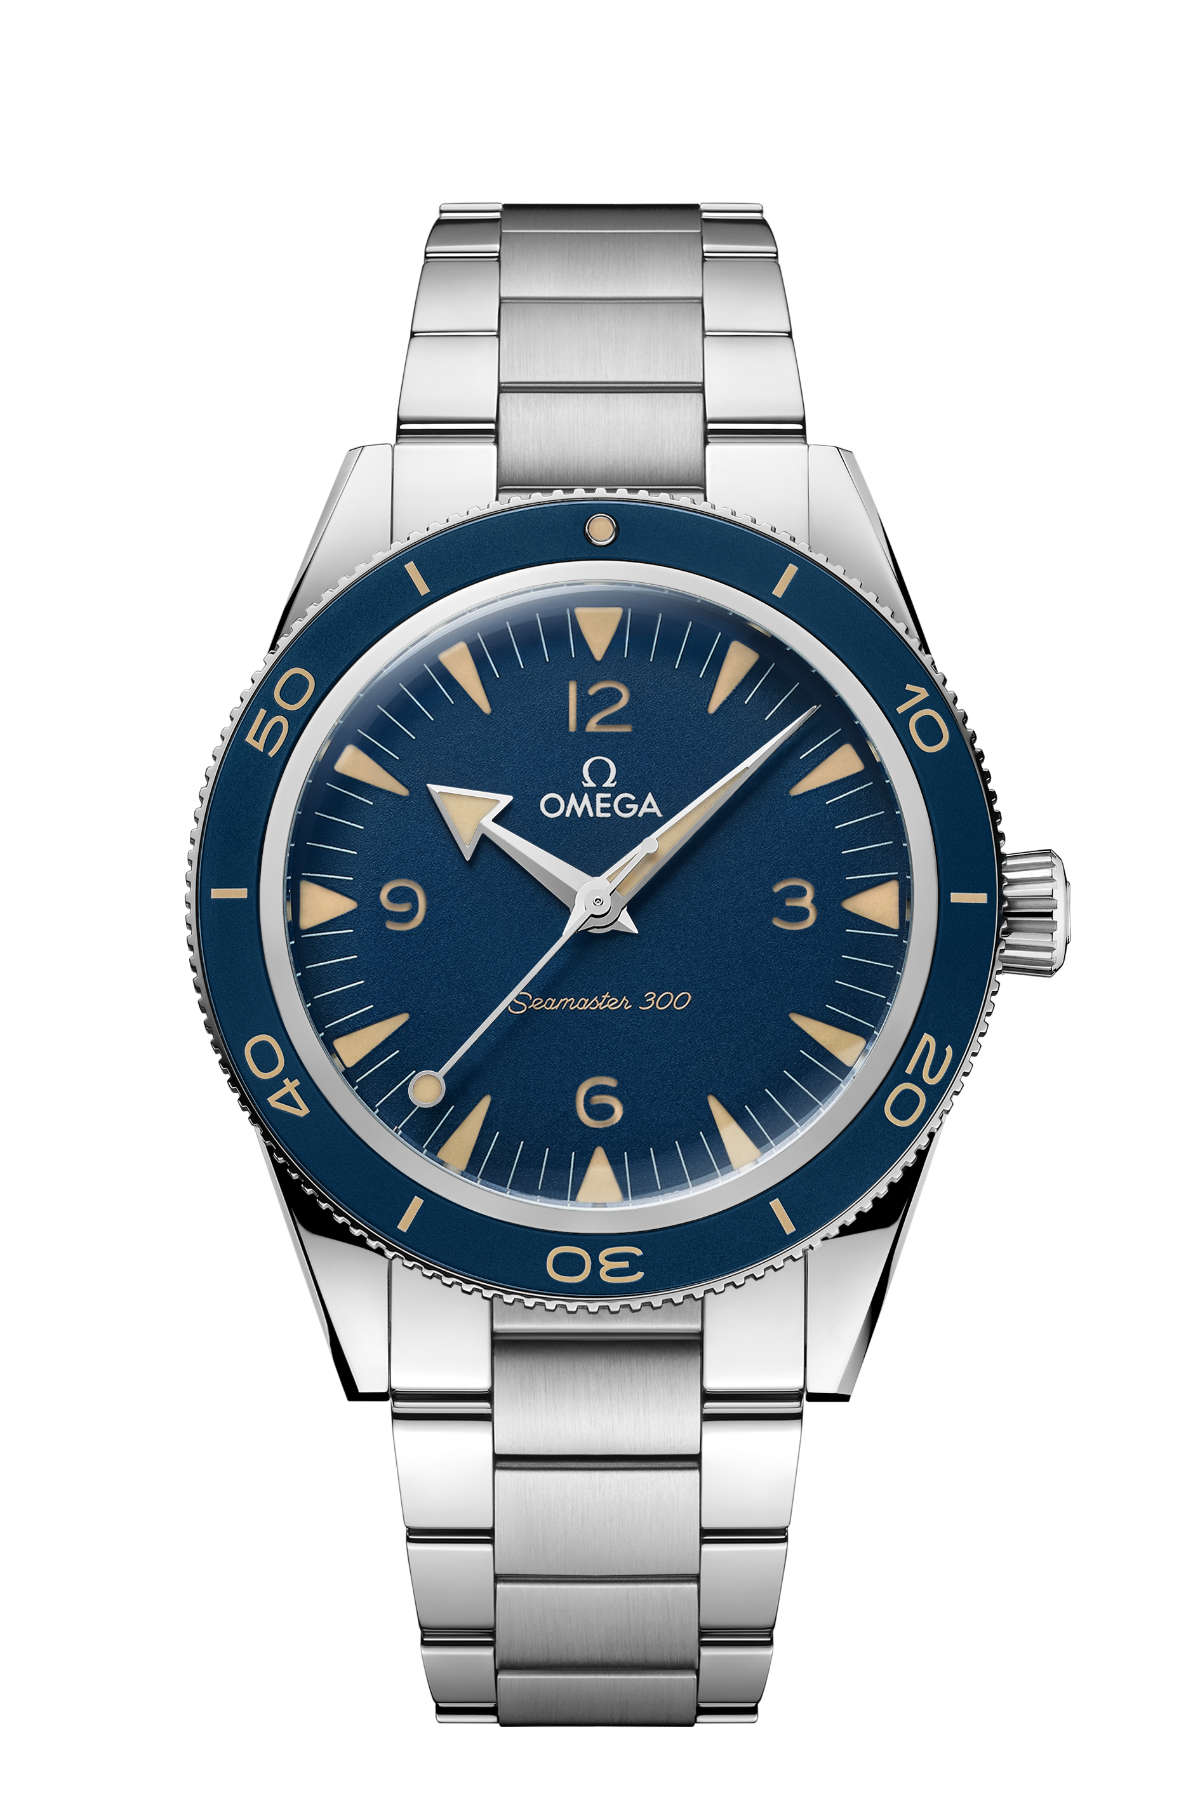 OMEGA Presents Its New Fantastic Timepieces For 2021 - Seamaster 300